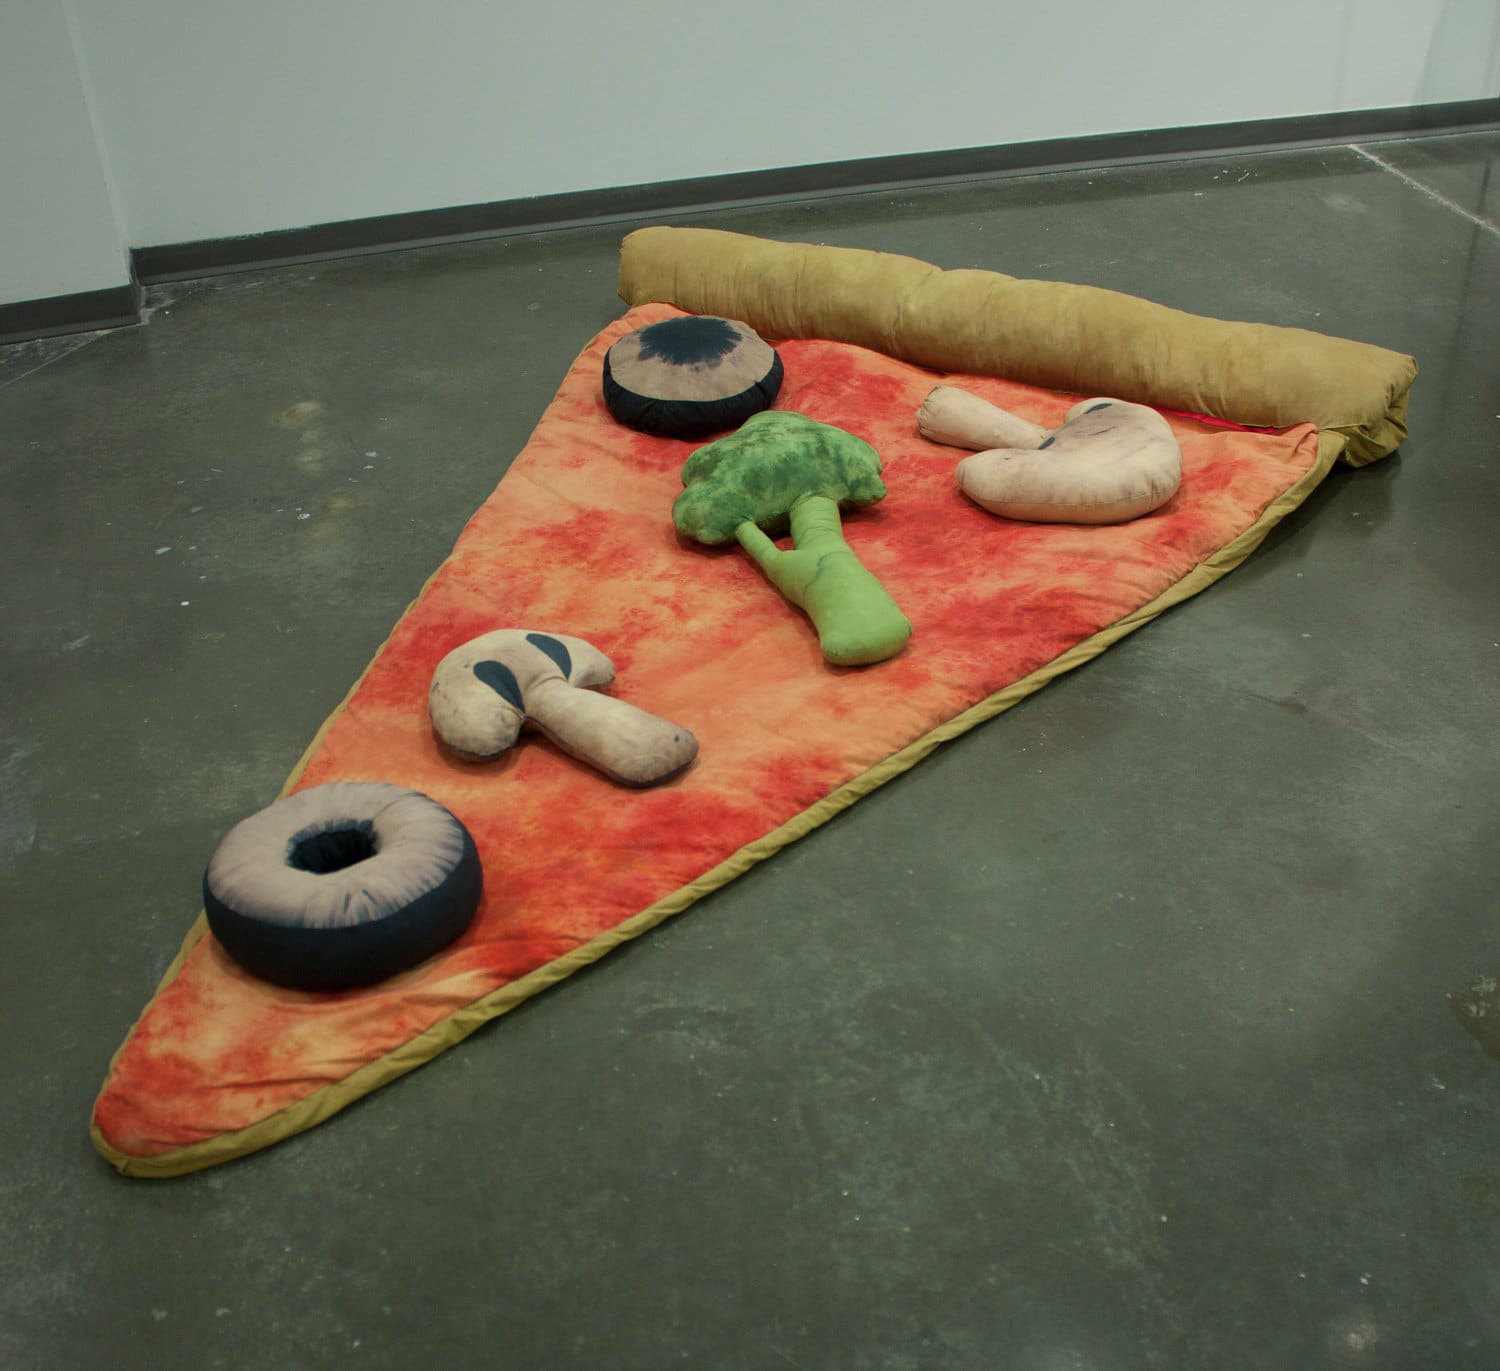 The Pizza Slice Sleeping Bag: Better Than A Nightly Snack